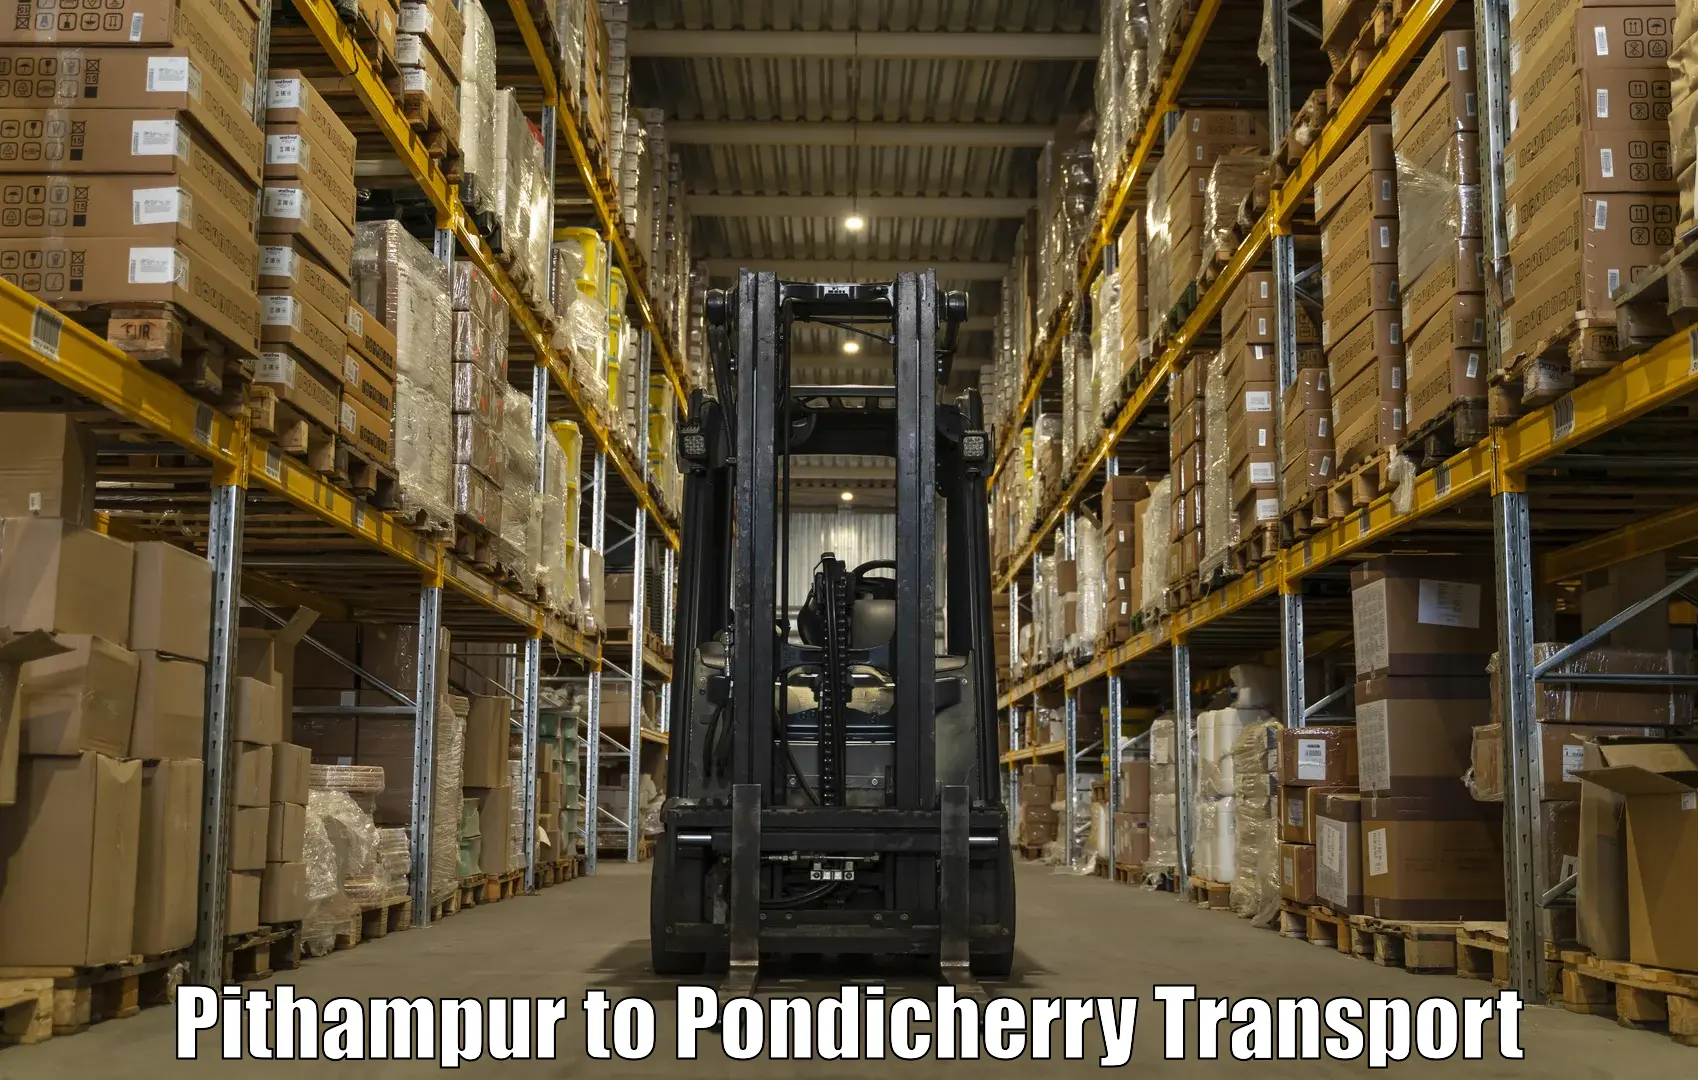 Best transport services in India Pithampur to Pondicherry